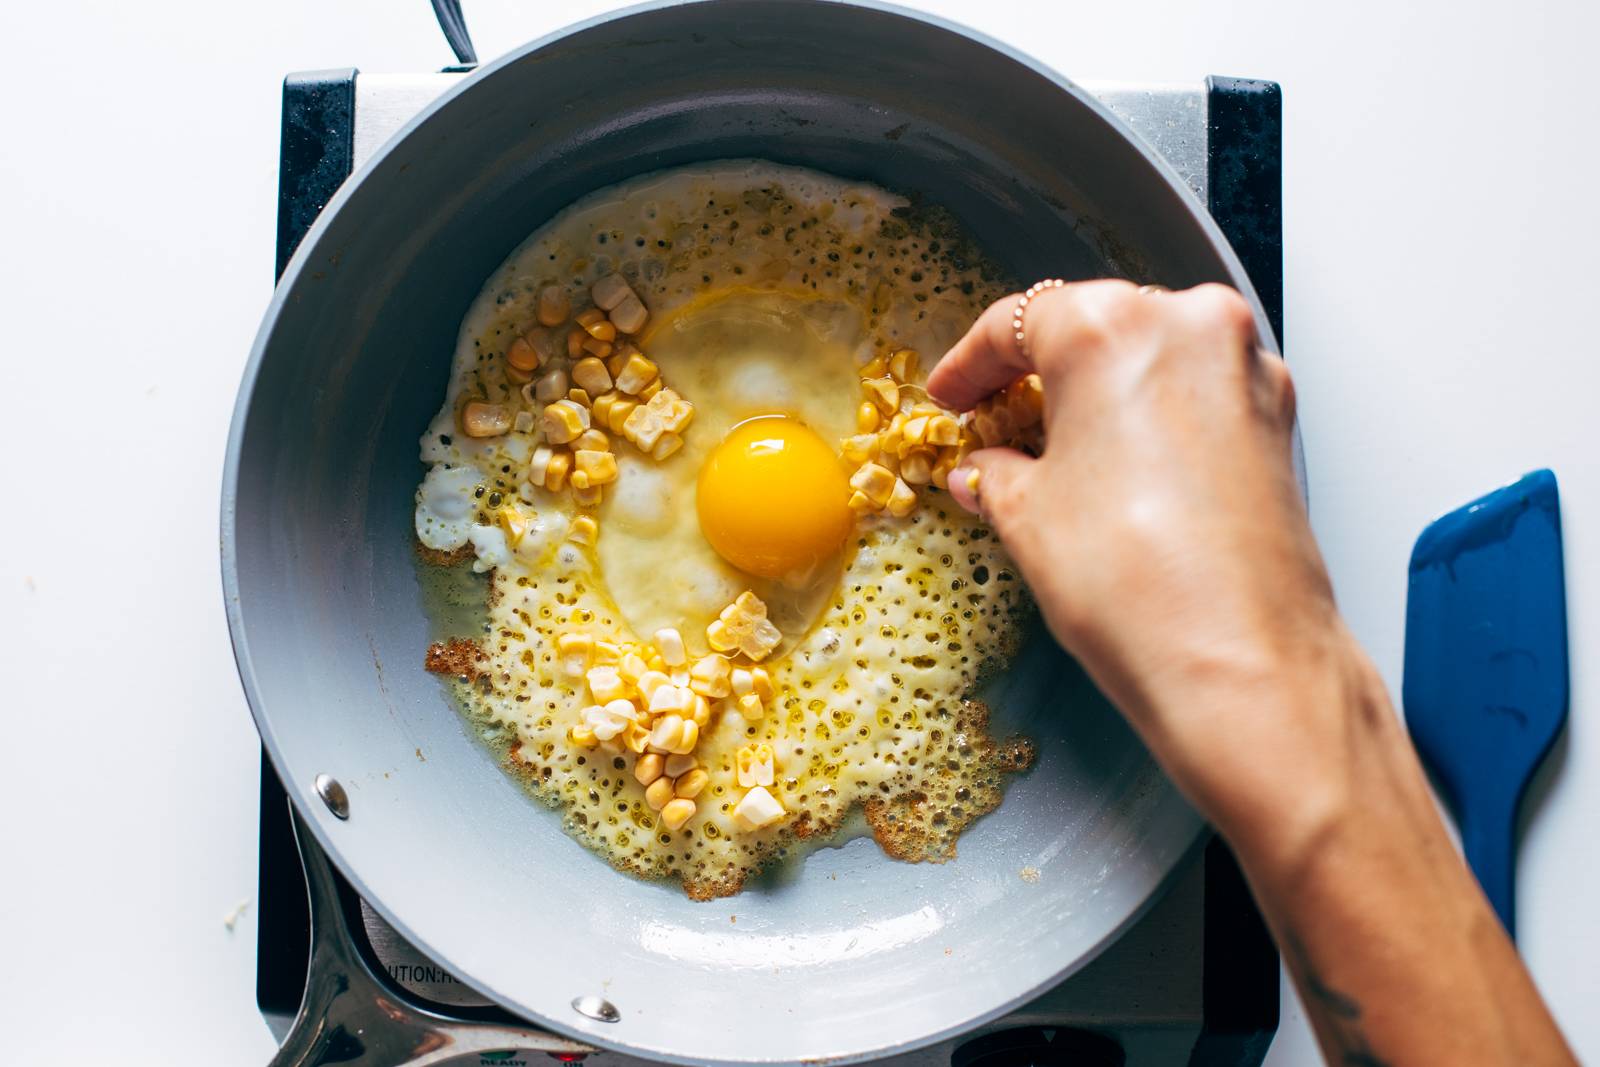 Adding corn to the egg and cheese.